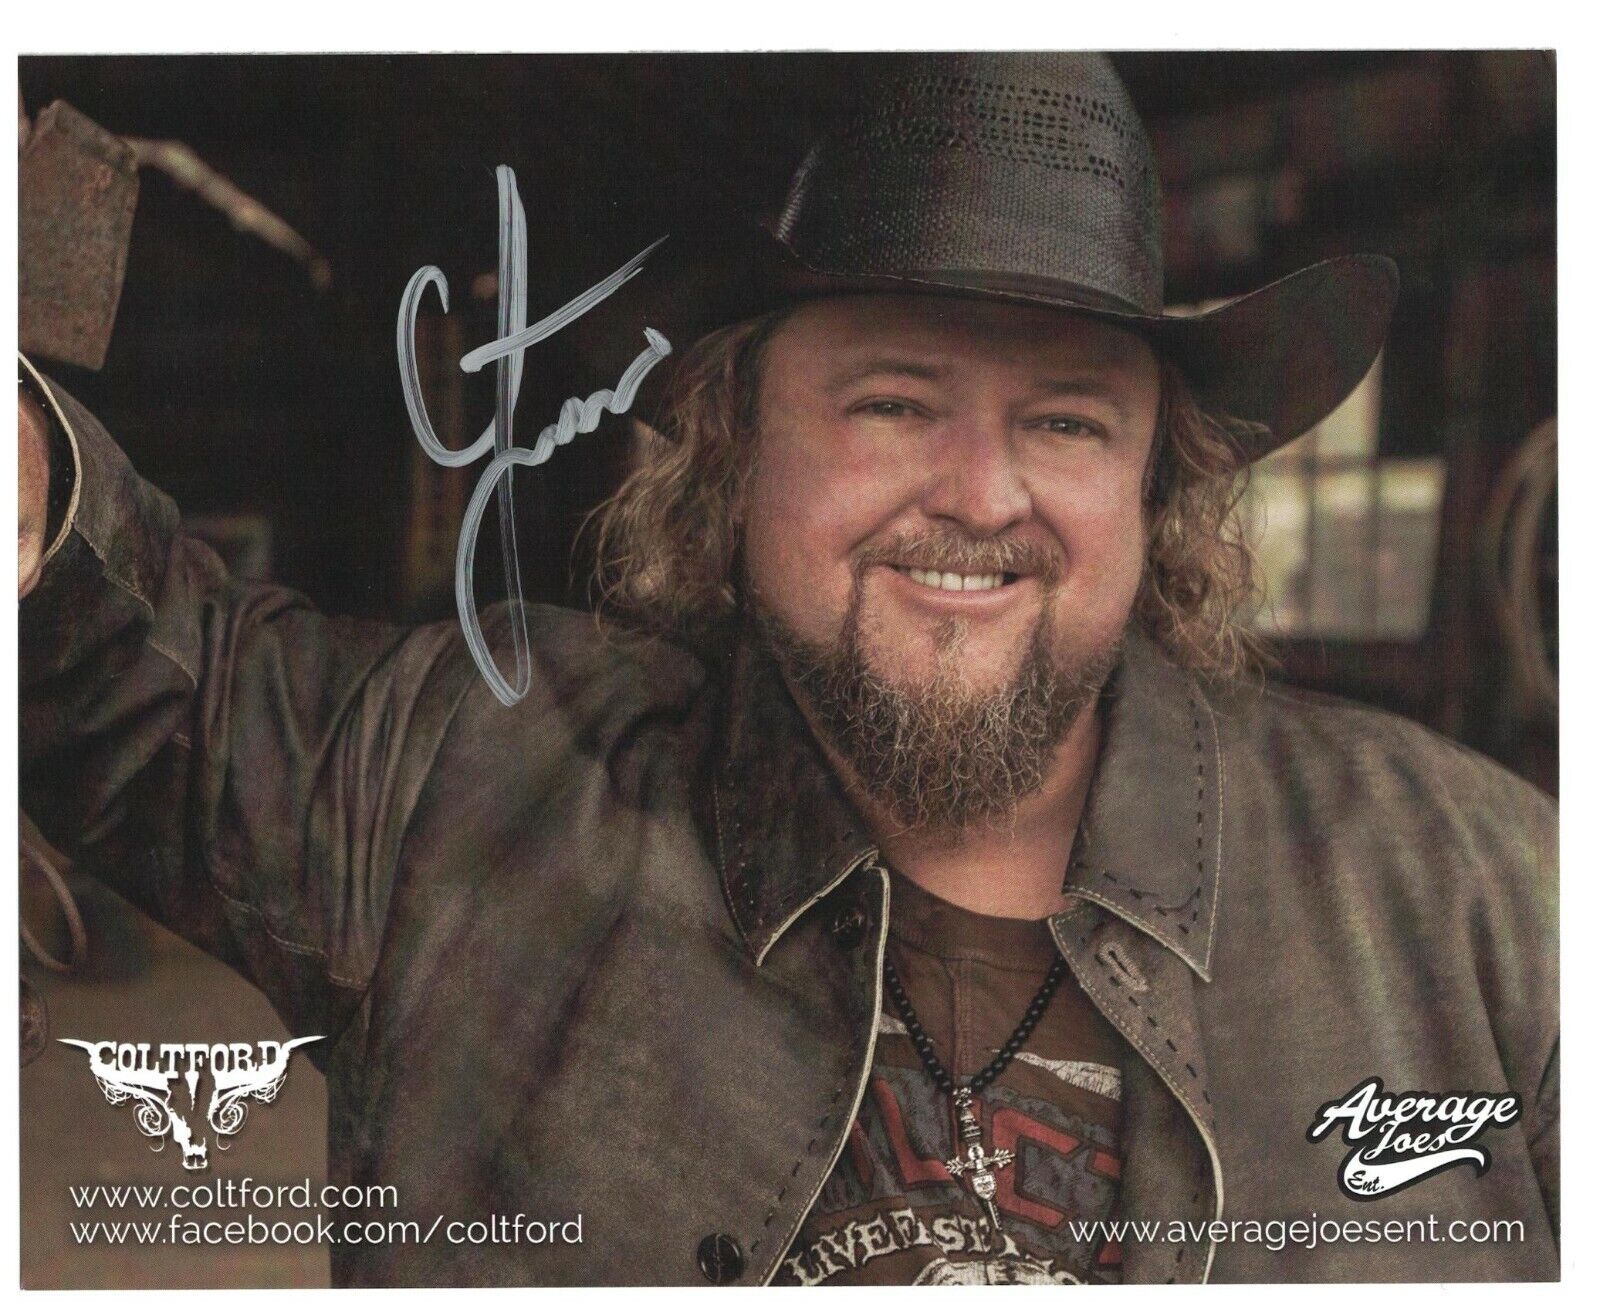 Colt Ford Signed Autographed 8 x 10 Photo Poster painting Country Music Singer Rapper C